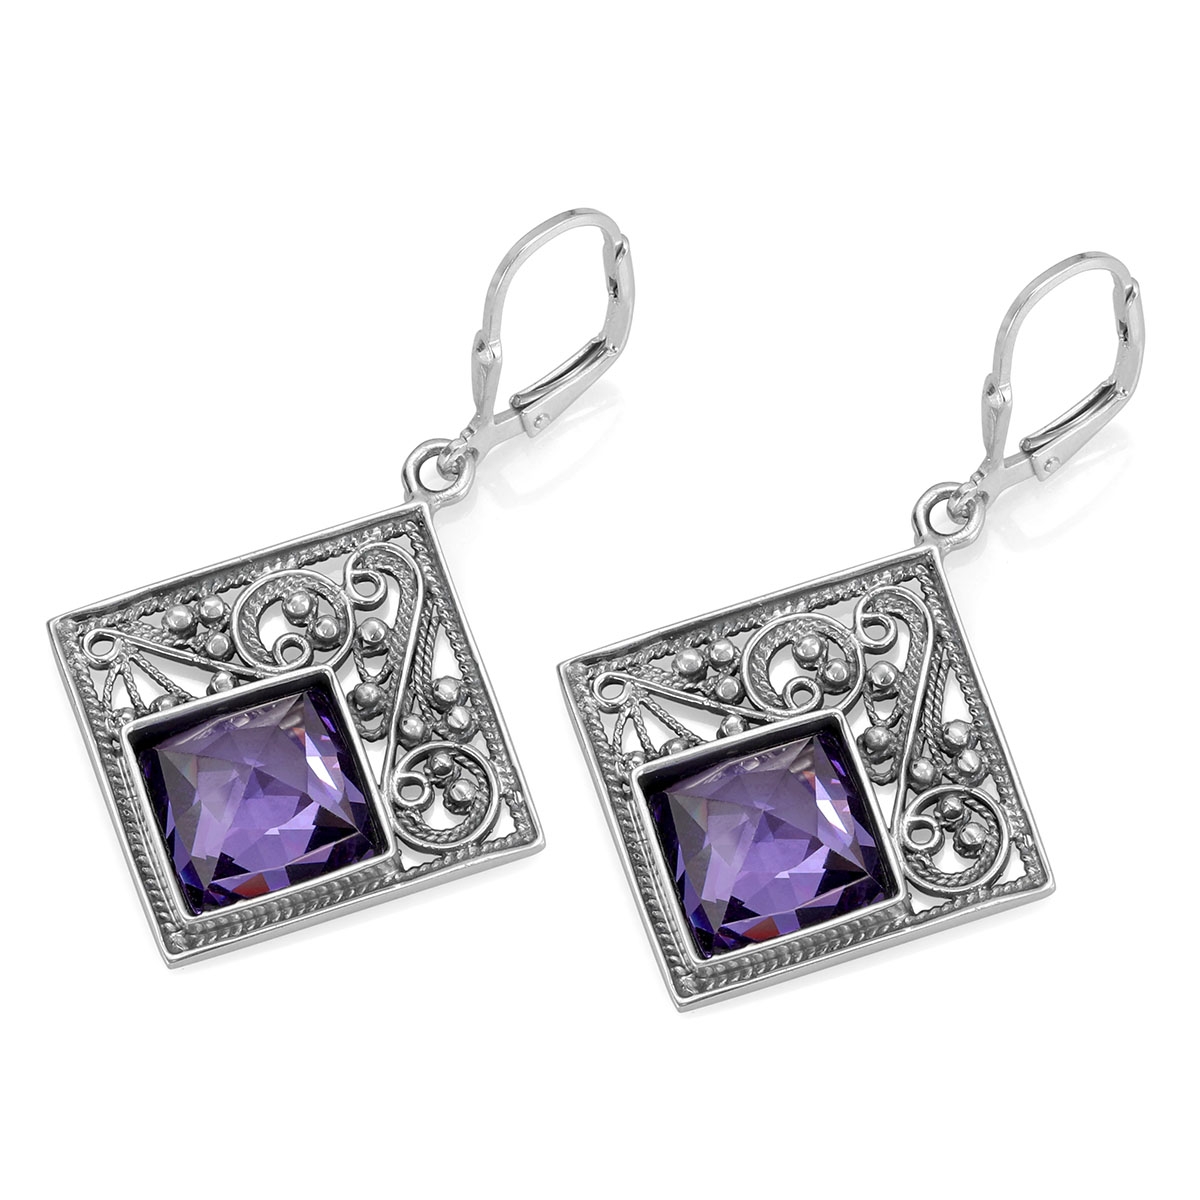 925 Sterling Silver Square Filigree Earrings With Amethyst Stone - 1